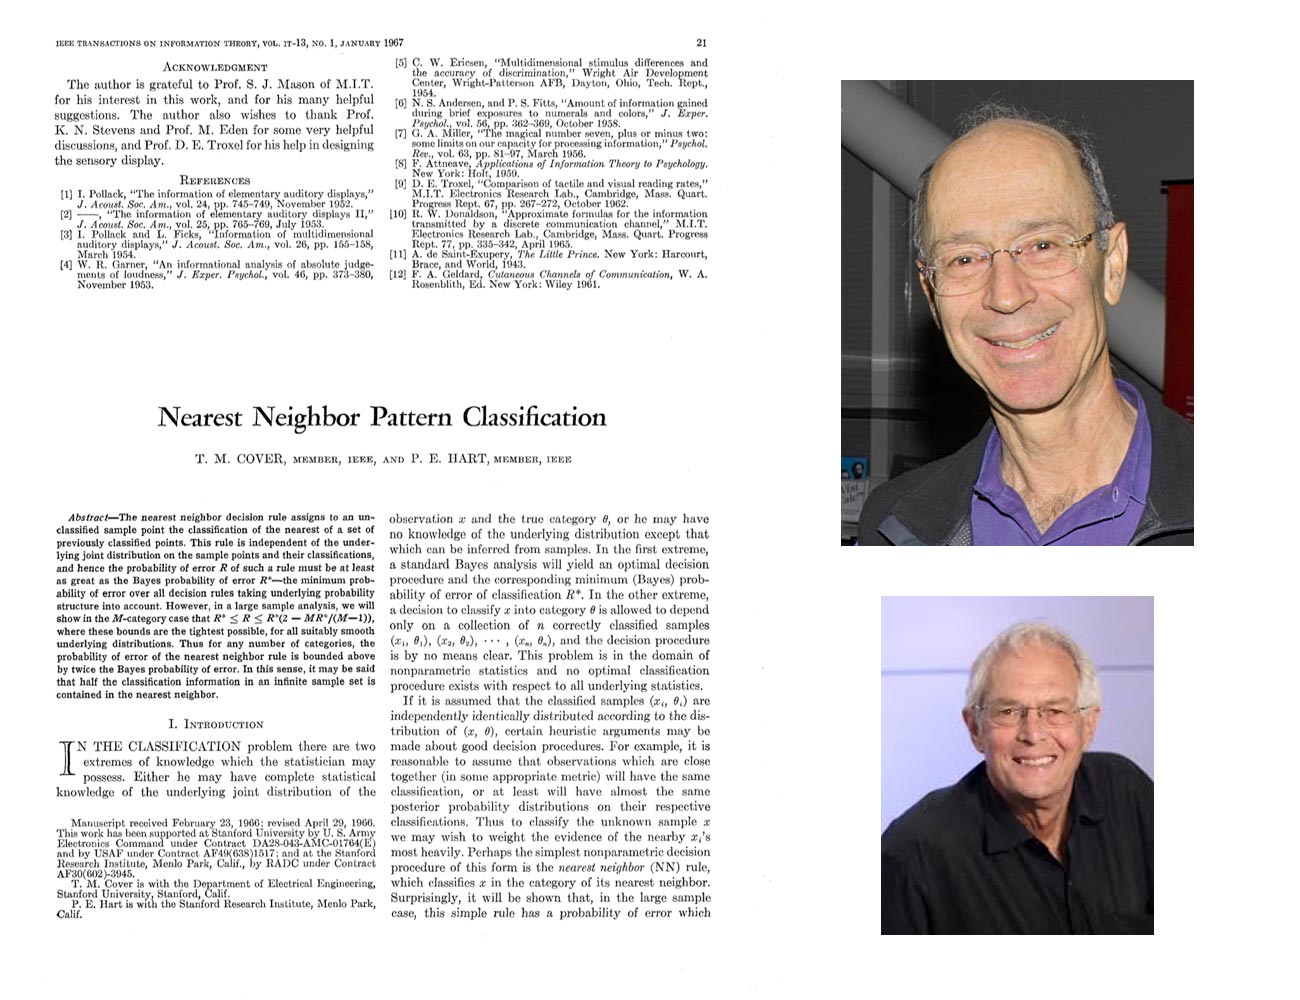 First page of the article 'Nearest Neighbor Pattern Classification' by Thomas Cover (bottom) and Peter Hart (top).